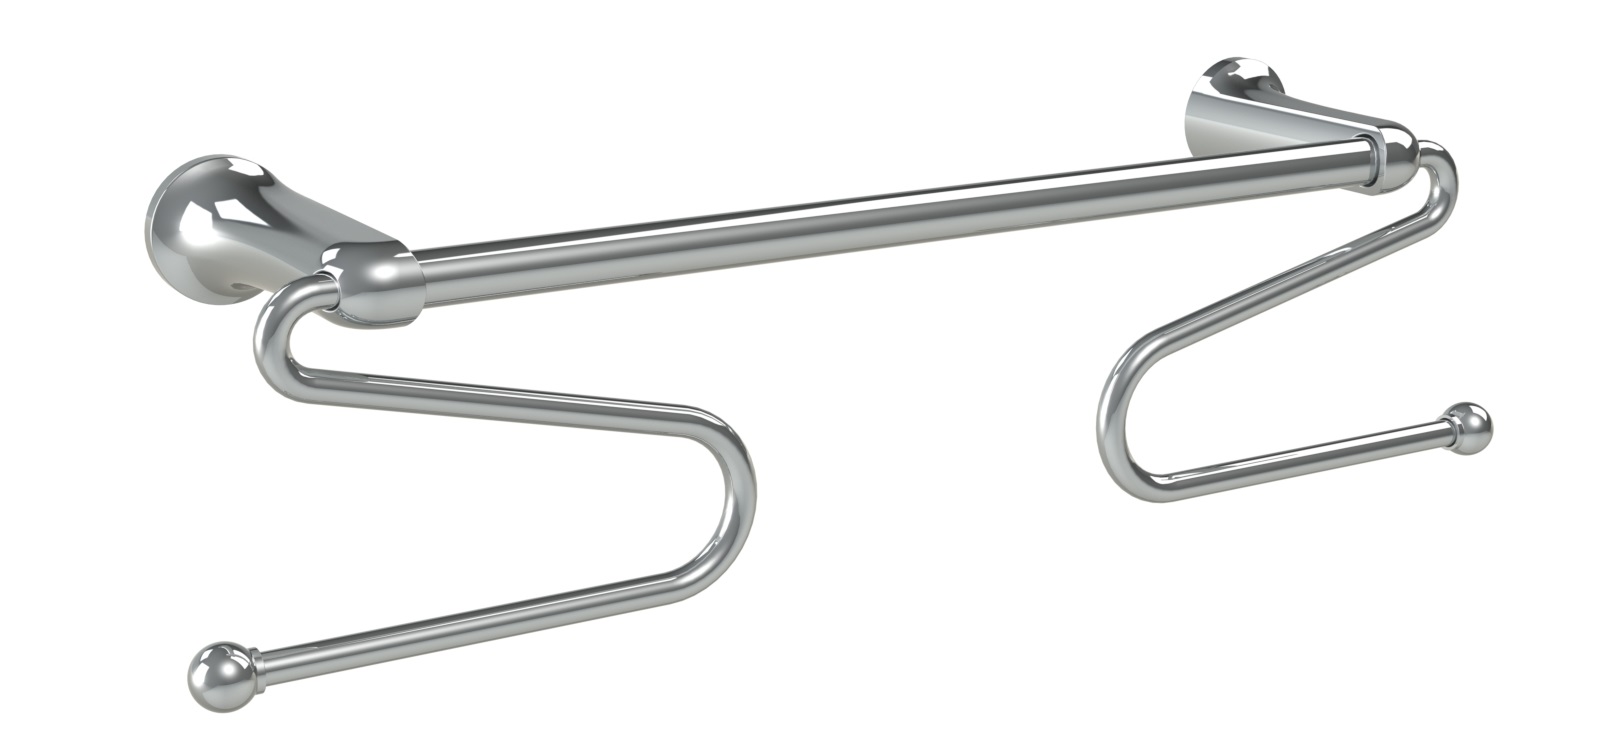 Isometric view of the Airfold towel bar